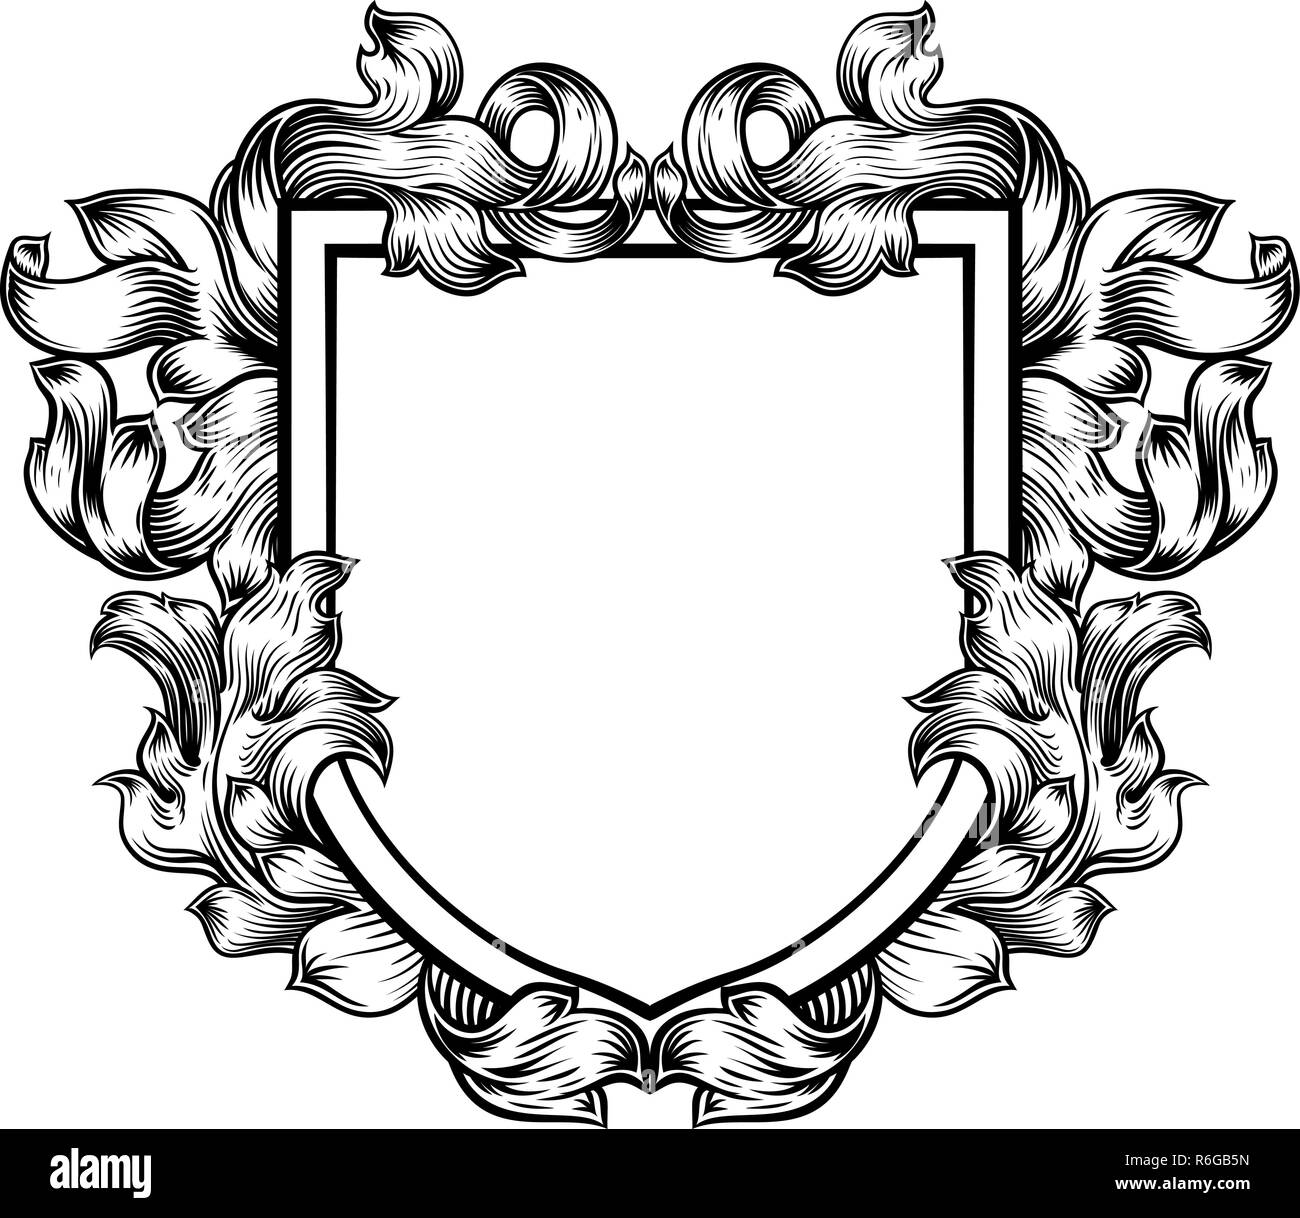 Coat of Arms Crest Family Knight Heraldic Shield Stock Vector